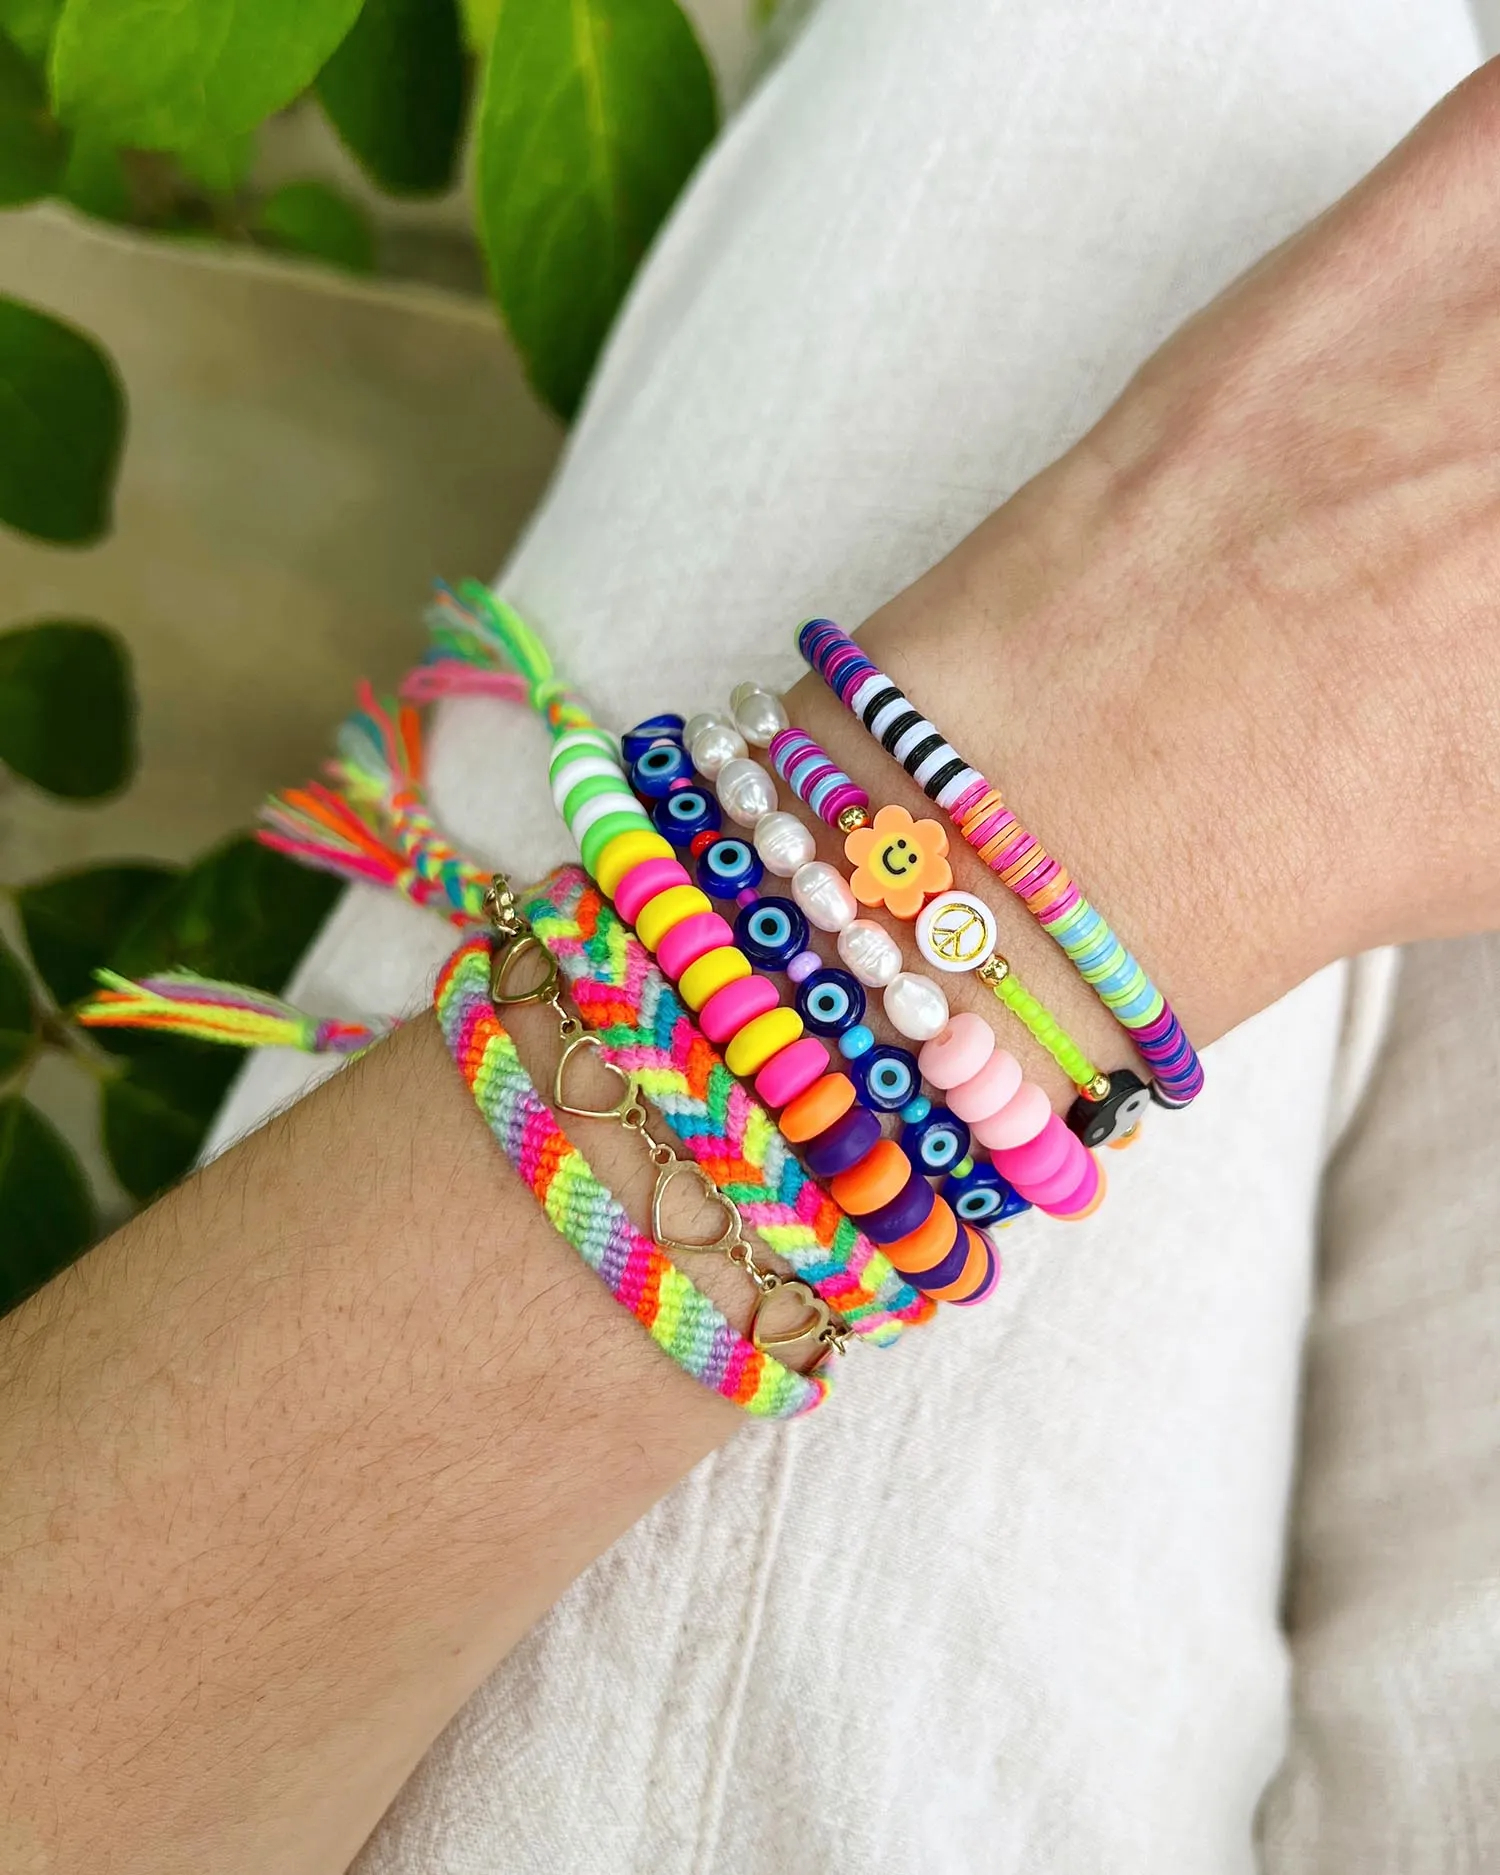 How to make beaded bracelets with elastic? Beaded bracelets are not only fashionable accessories but also delightful DIY